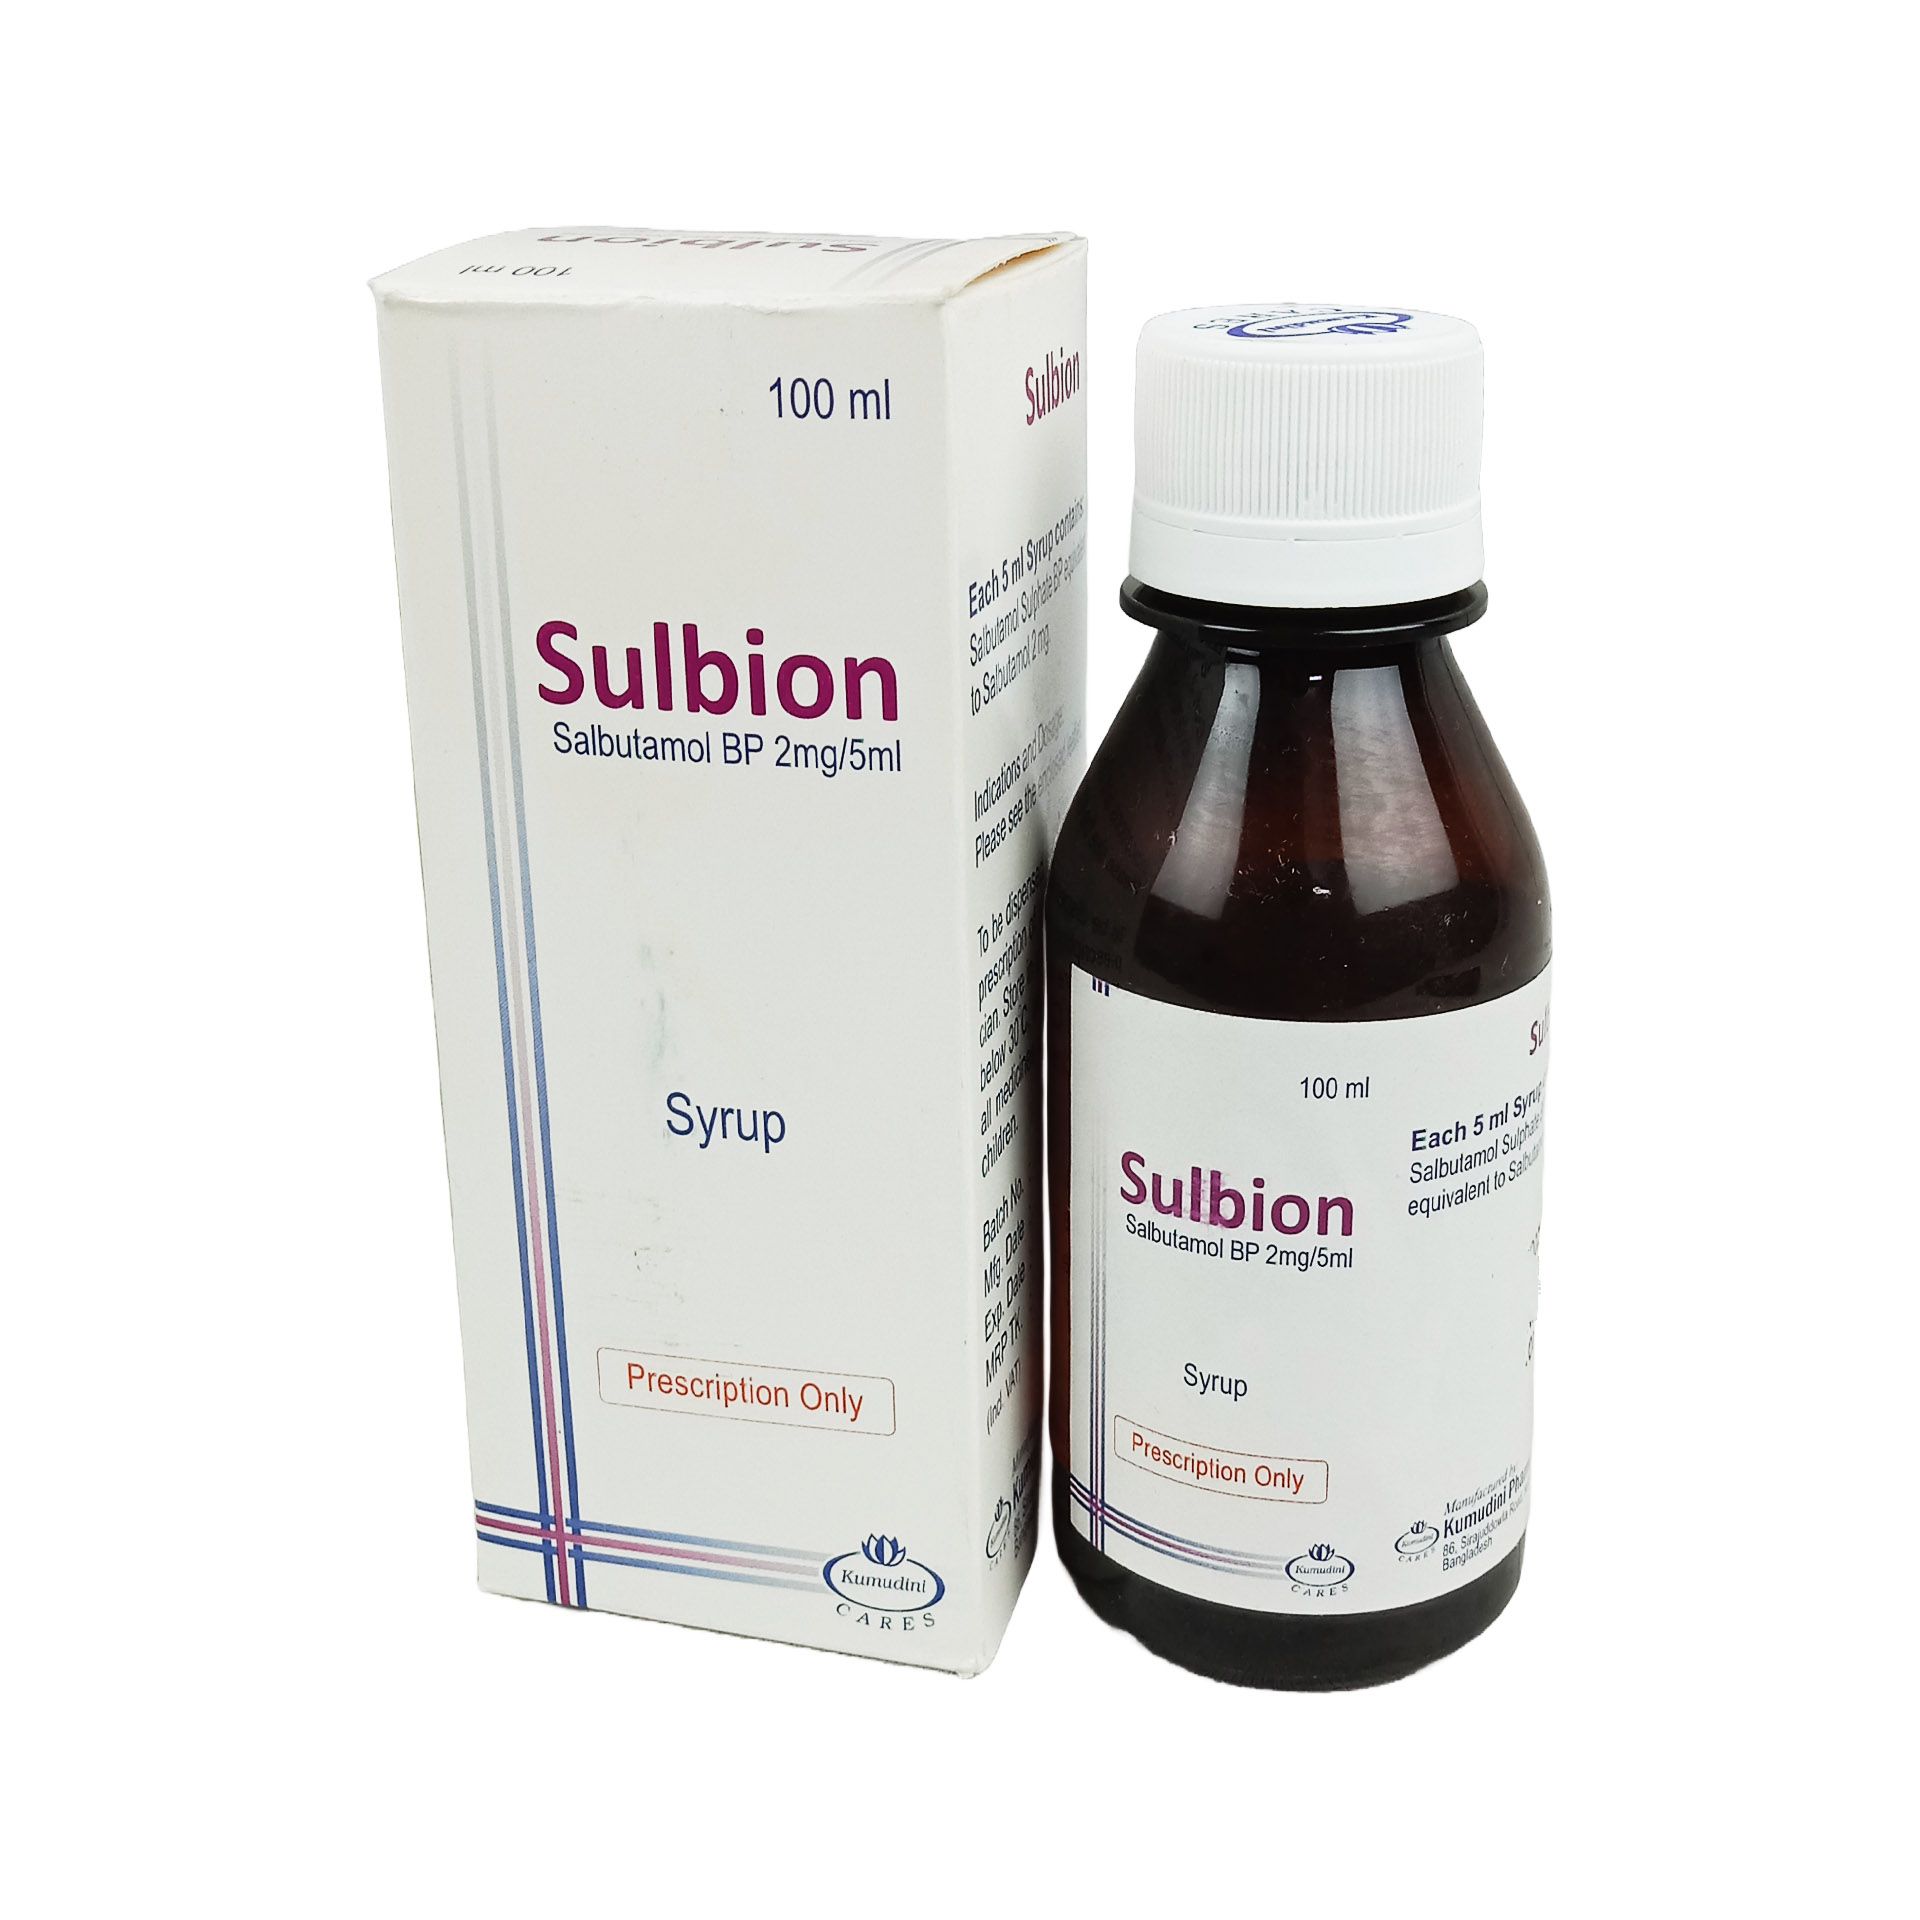 Sulbion 2mg/5ml Syrup